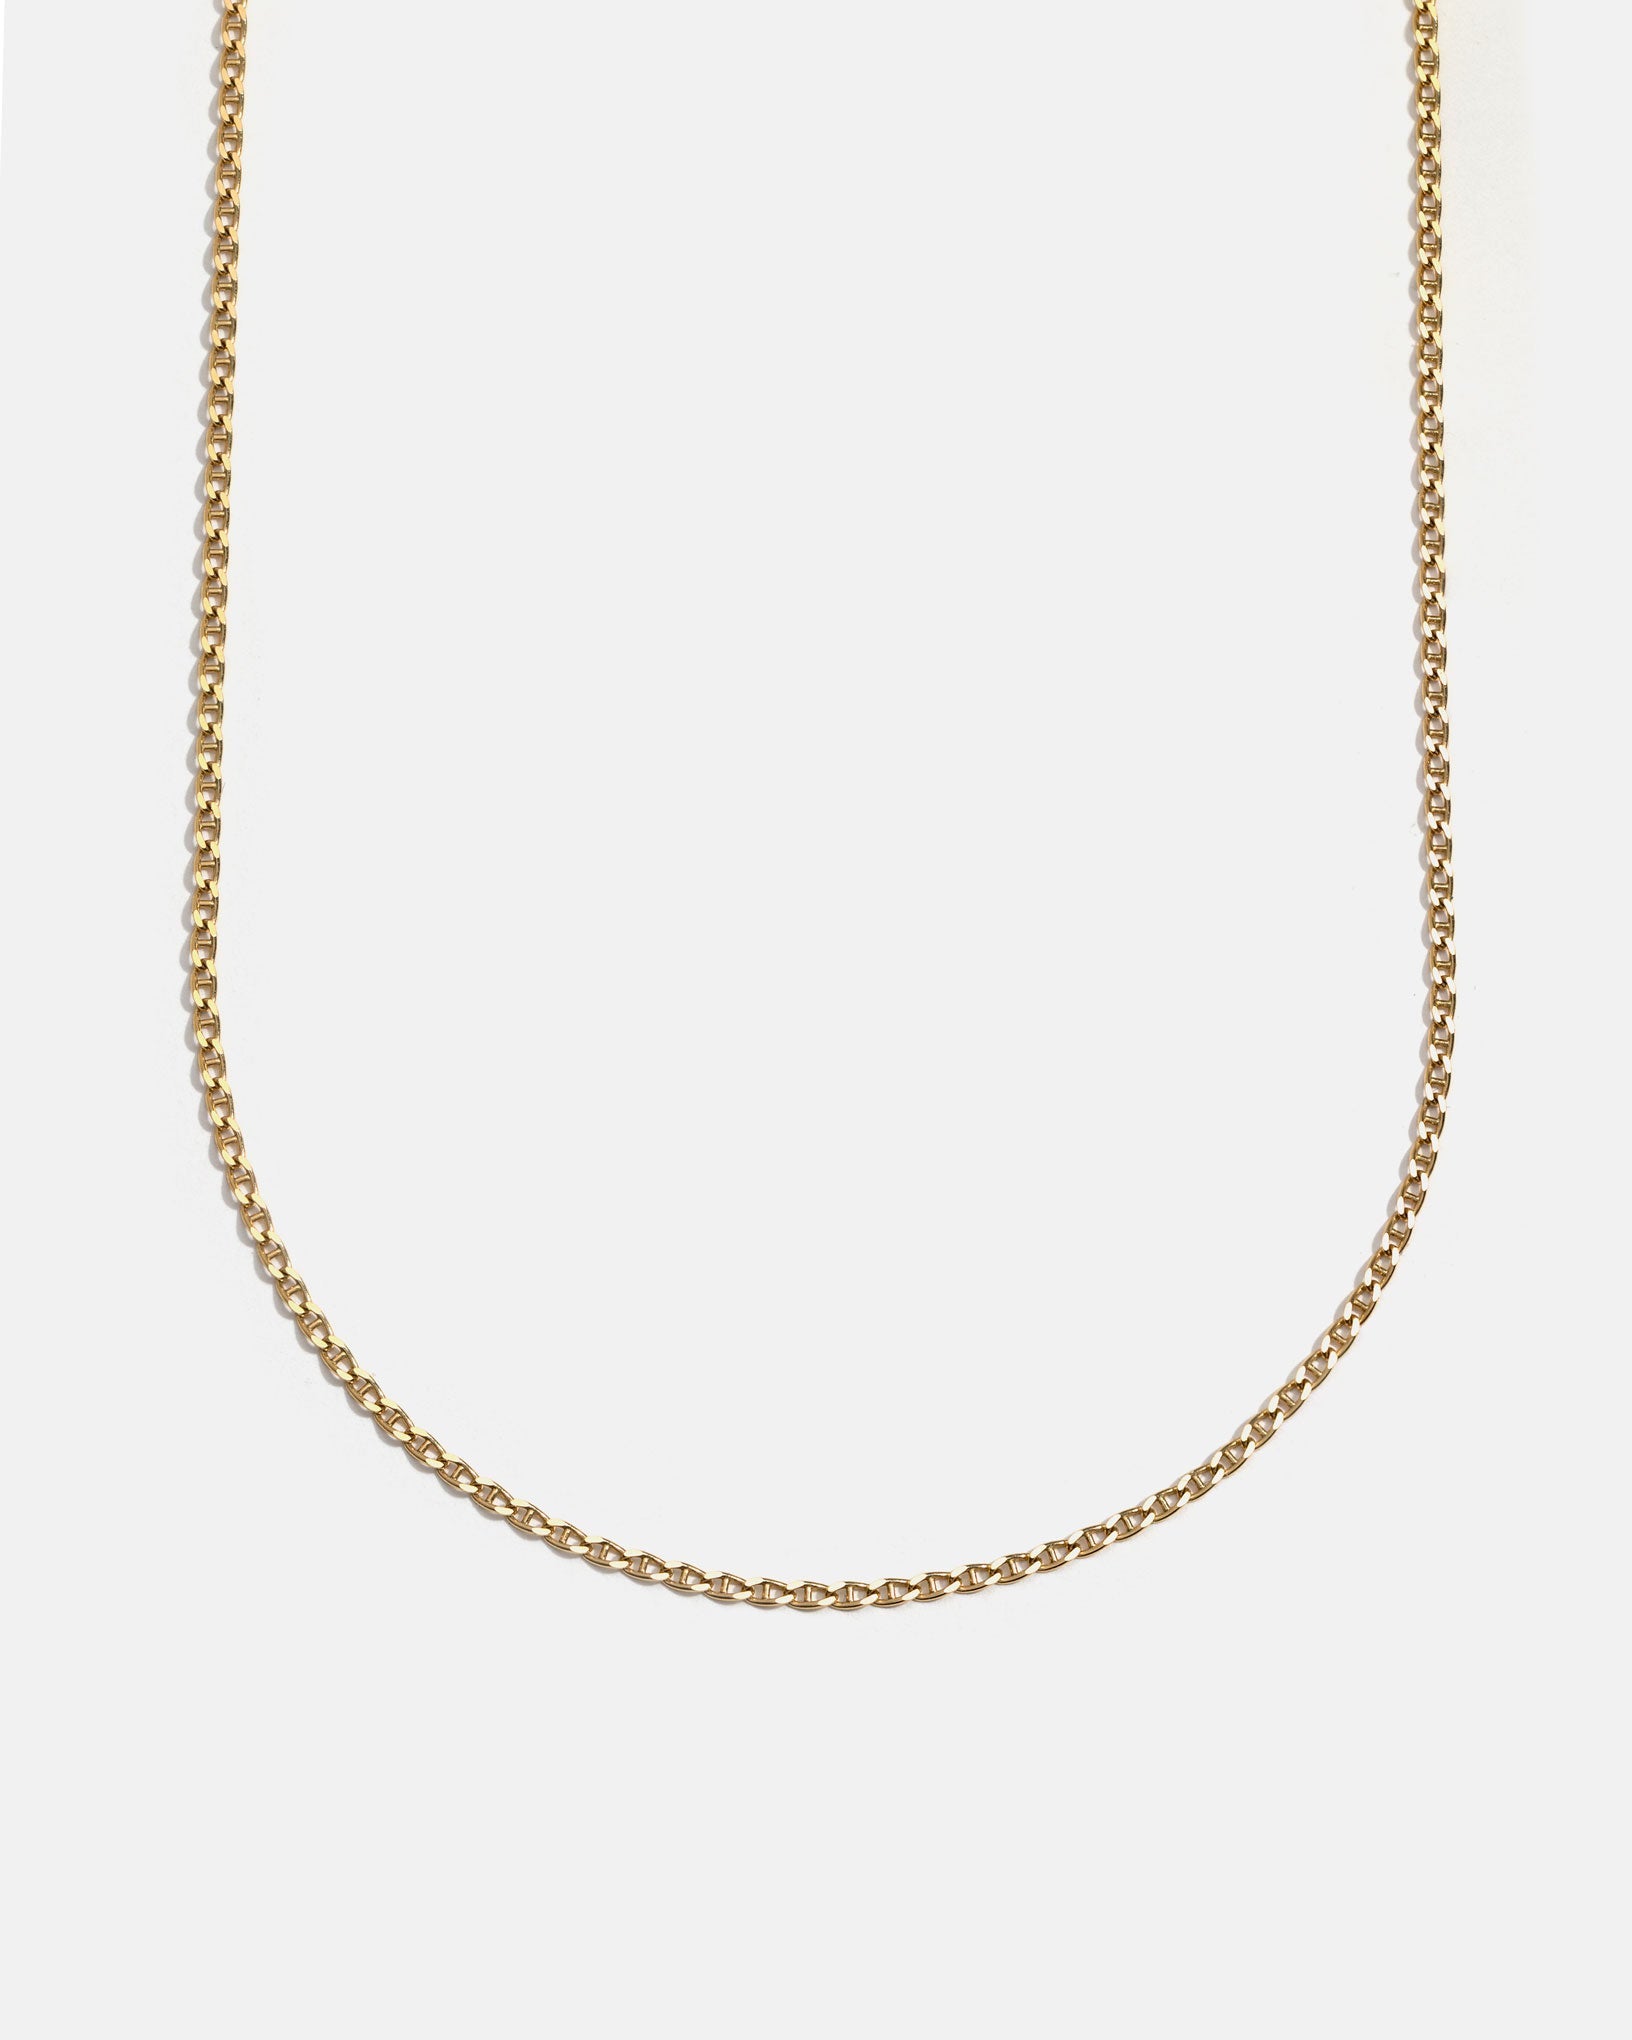 Anchor Chain in 10k Yellow Gold